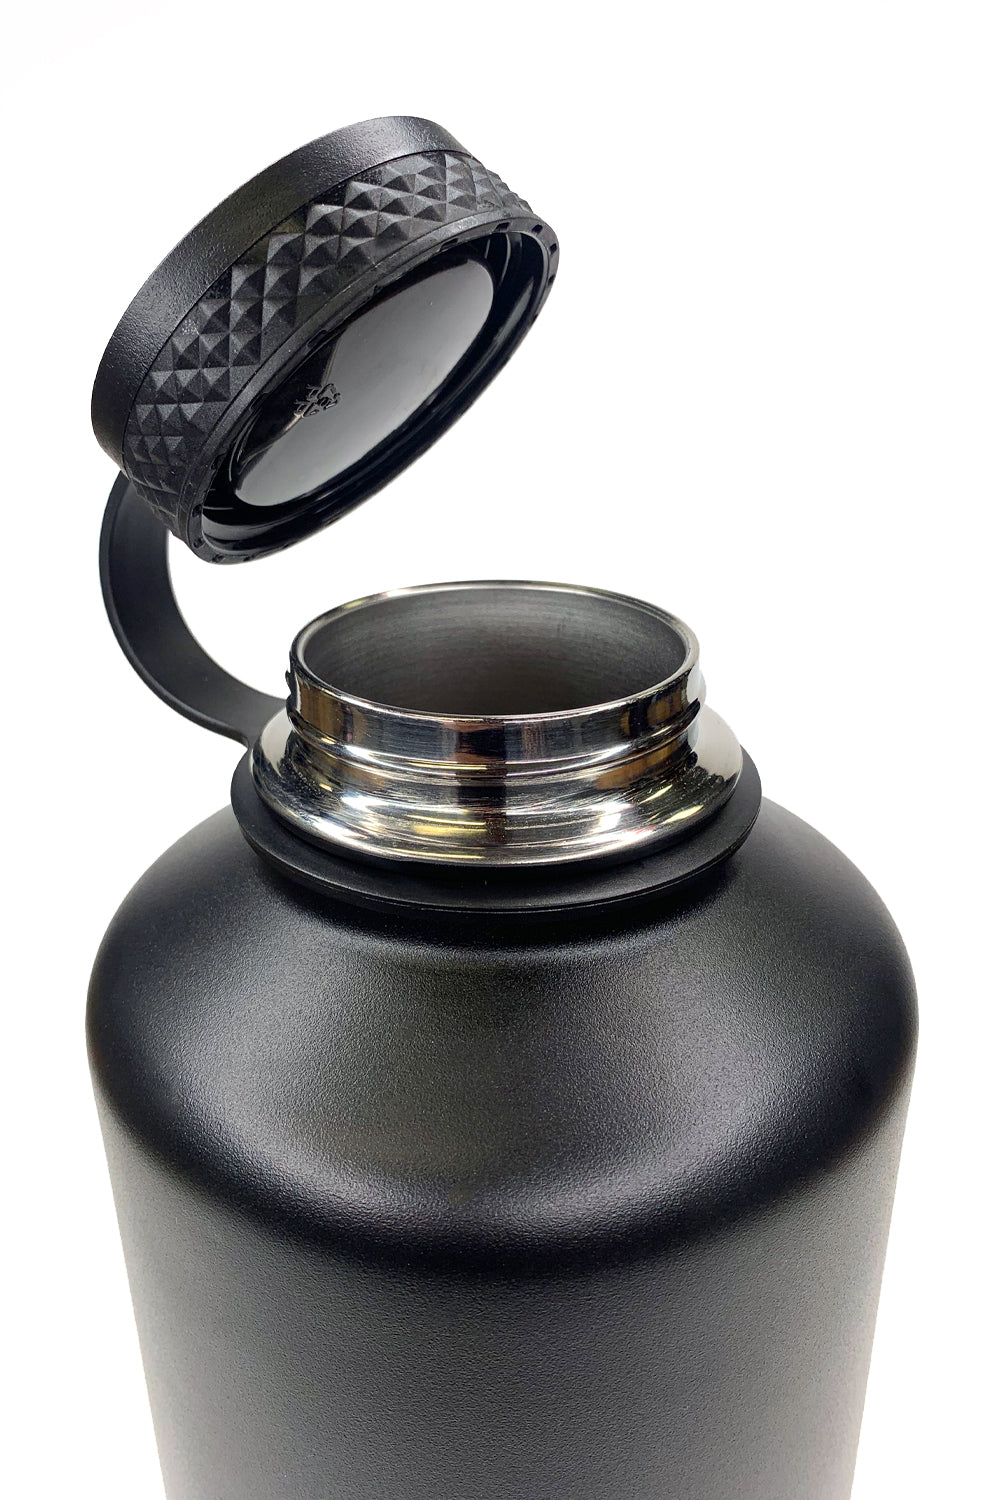 64 oz Stacked Stainless Steel Growler - Black